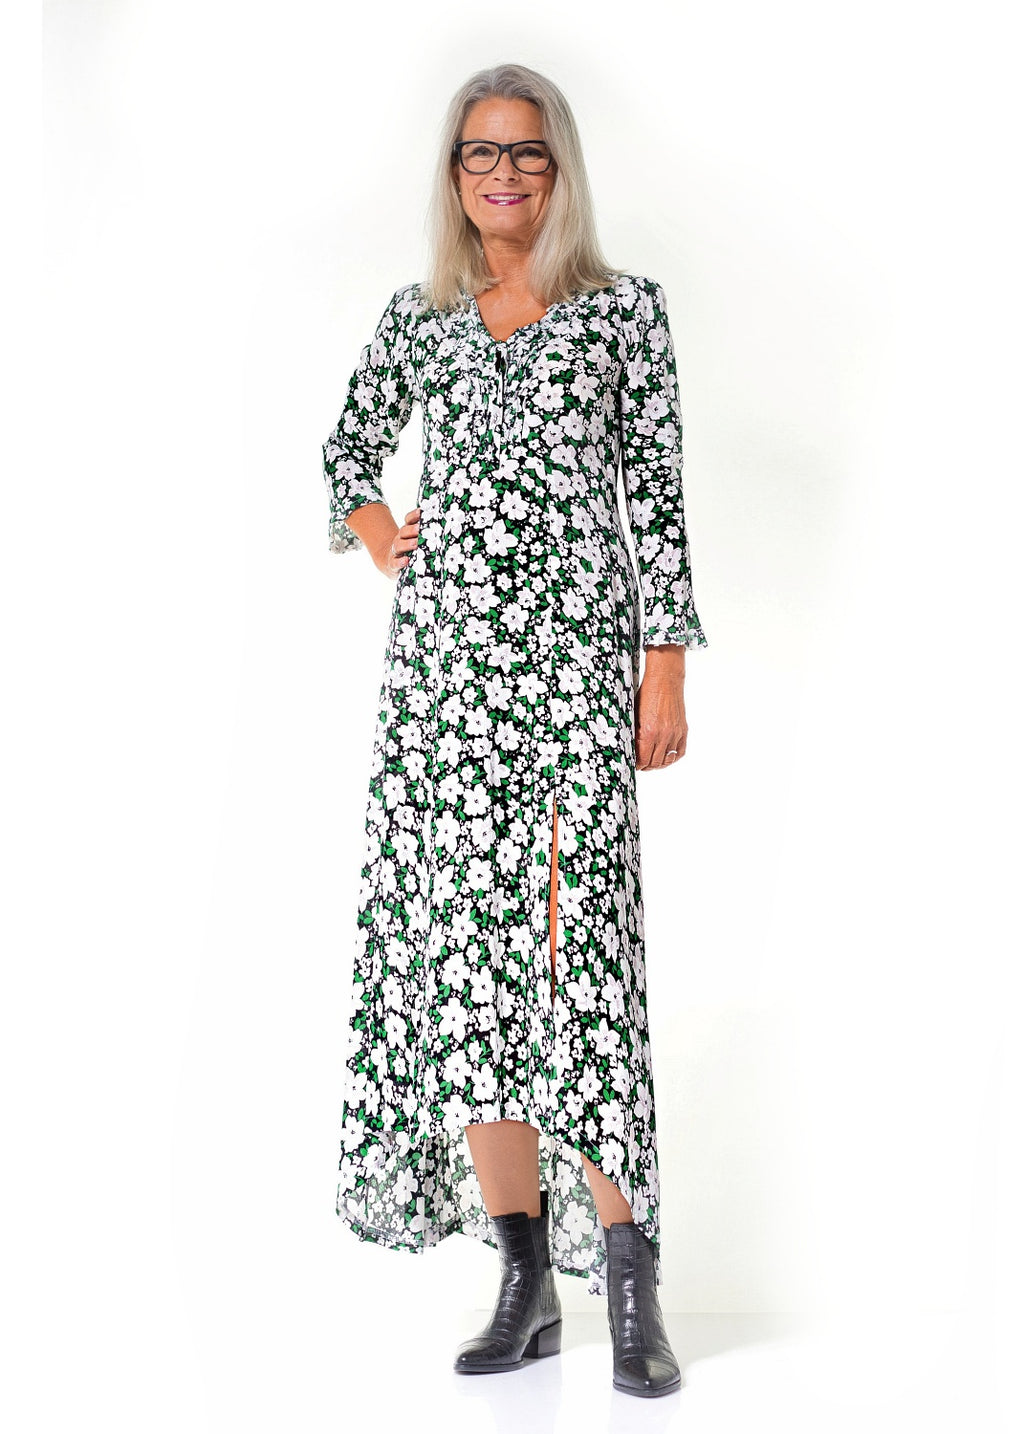 Mila Maxi Boho Dress in viscose crepe with high low hem line for sunny days is inspired from the 70’s, as the bell-shaped sleeves and the raw mini frills.